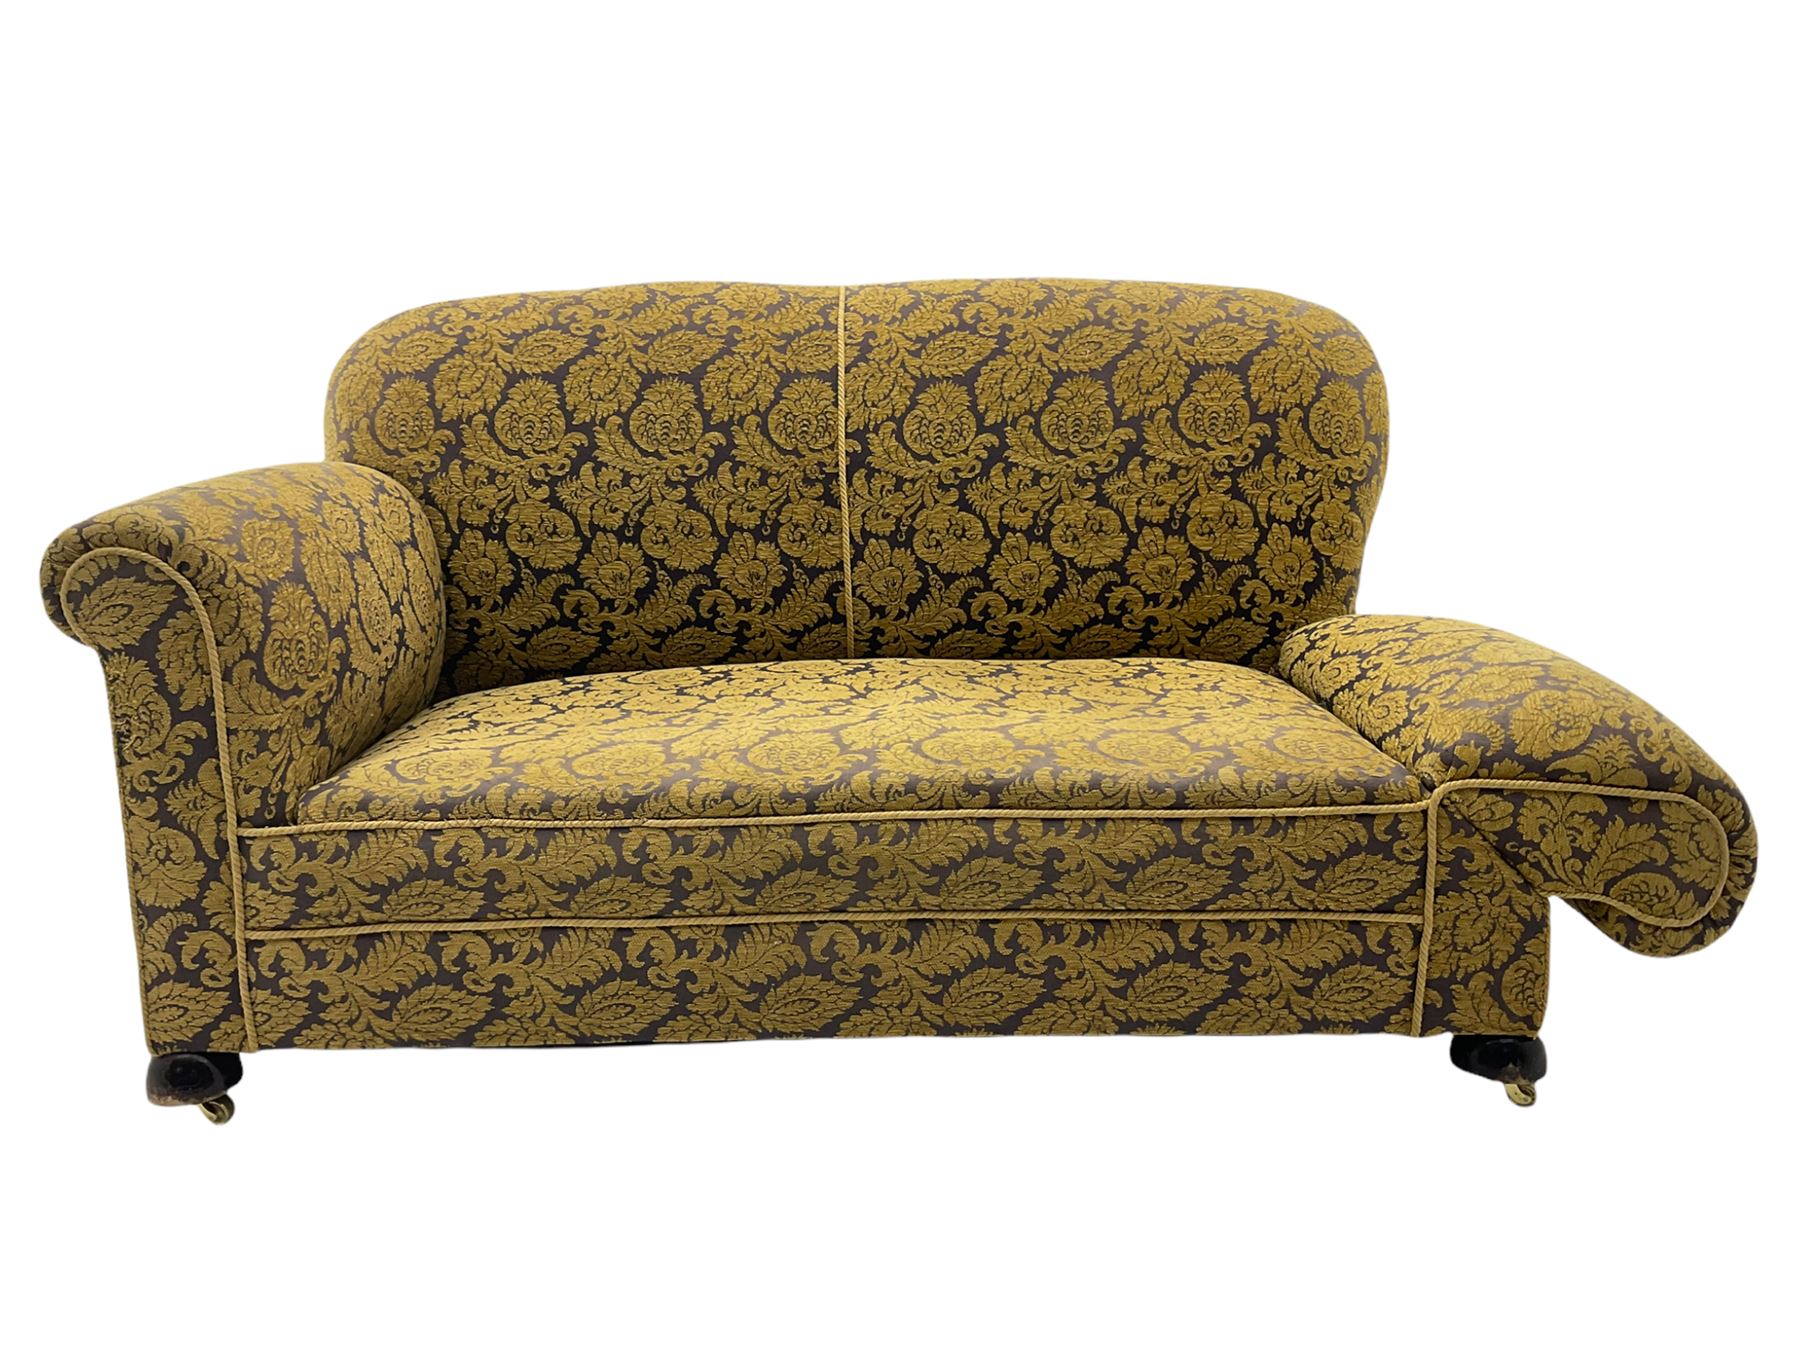 20th century drop arm two seat settee - Image 4 of 12